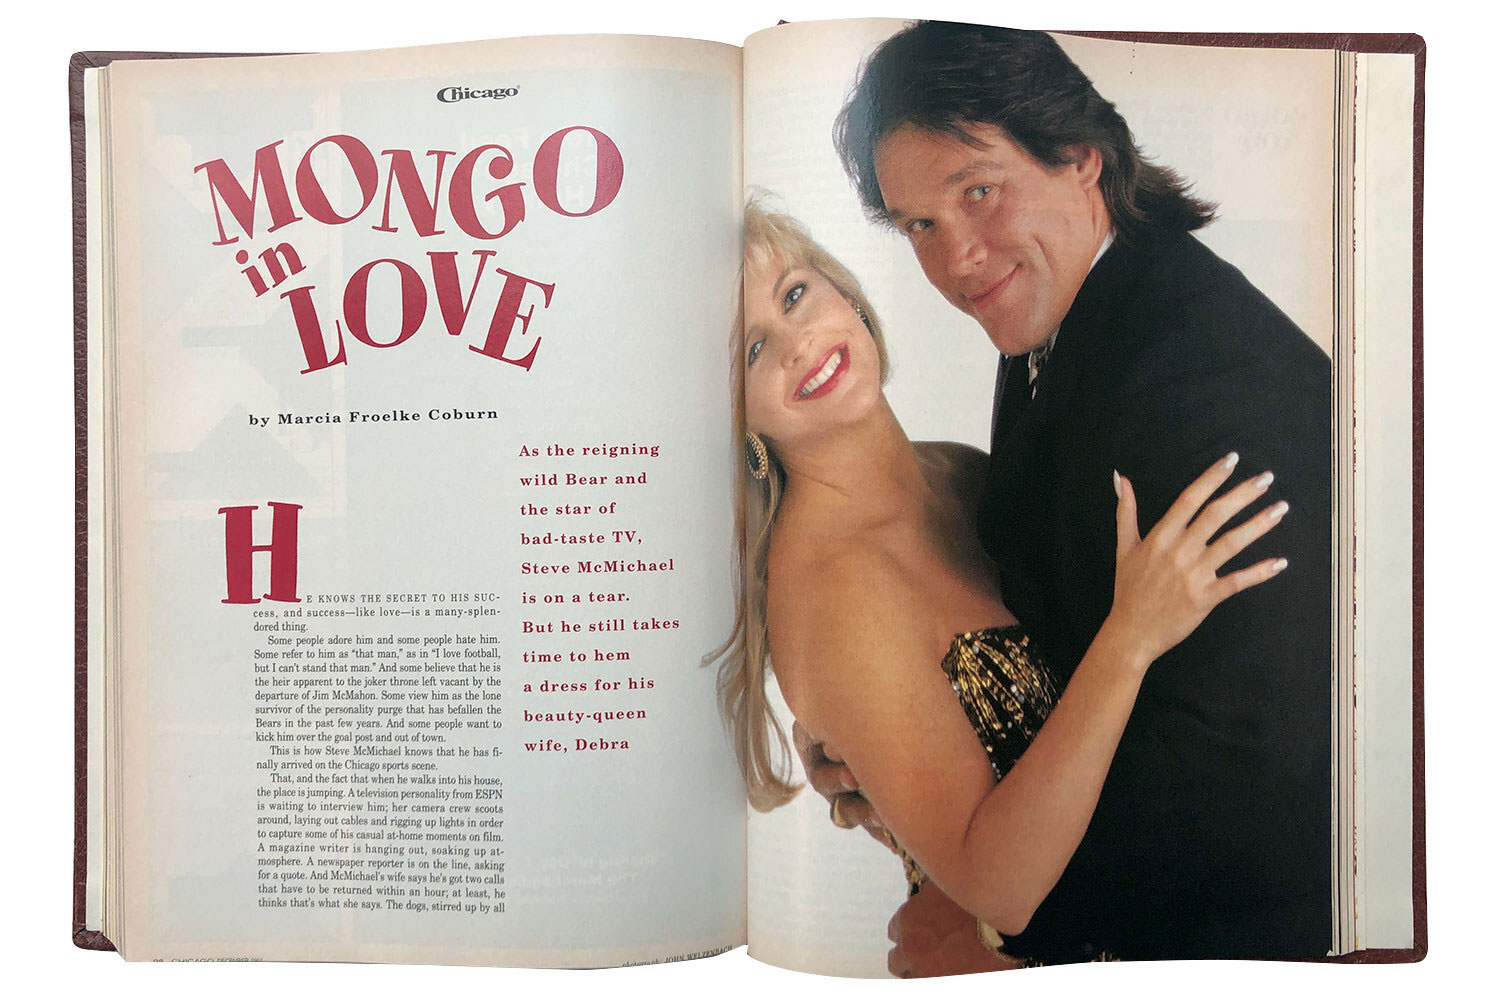 “Mongo in Love” pages